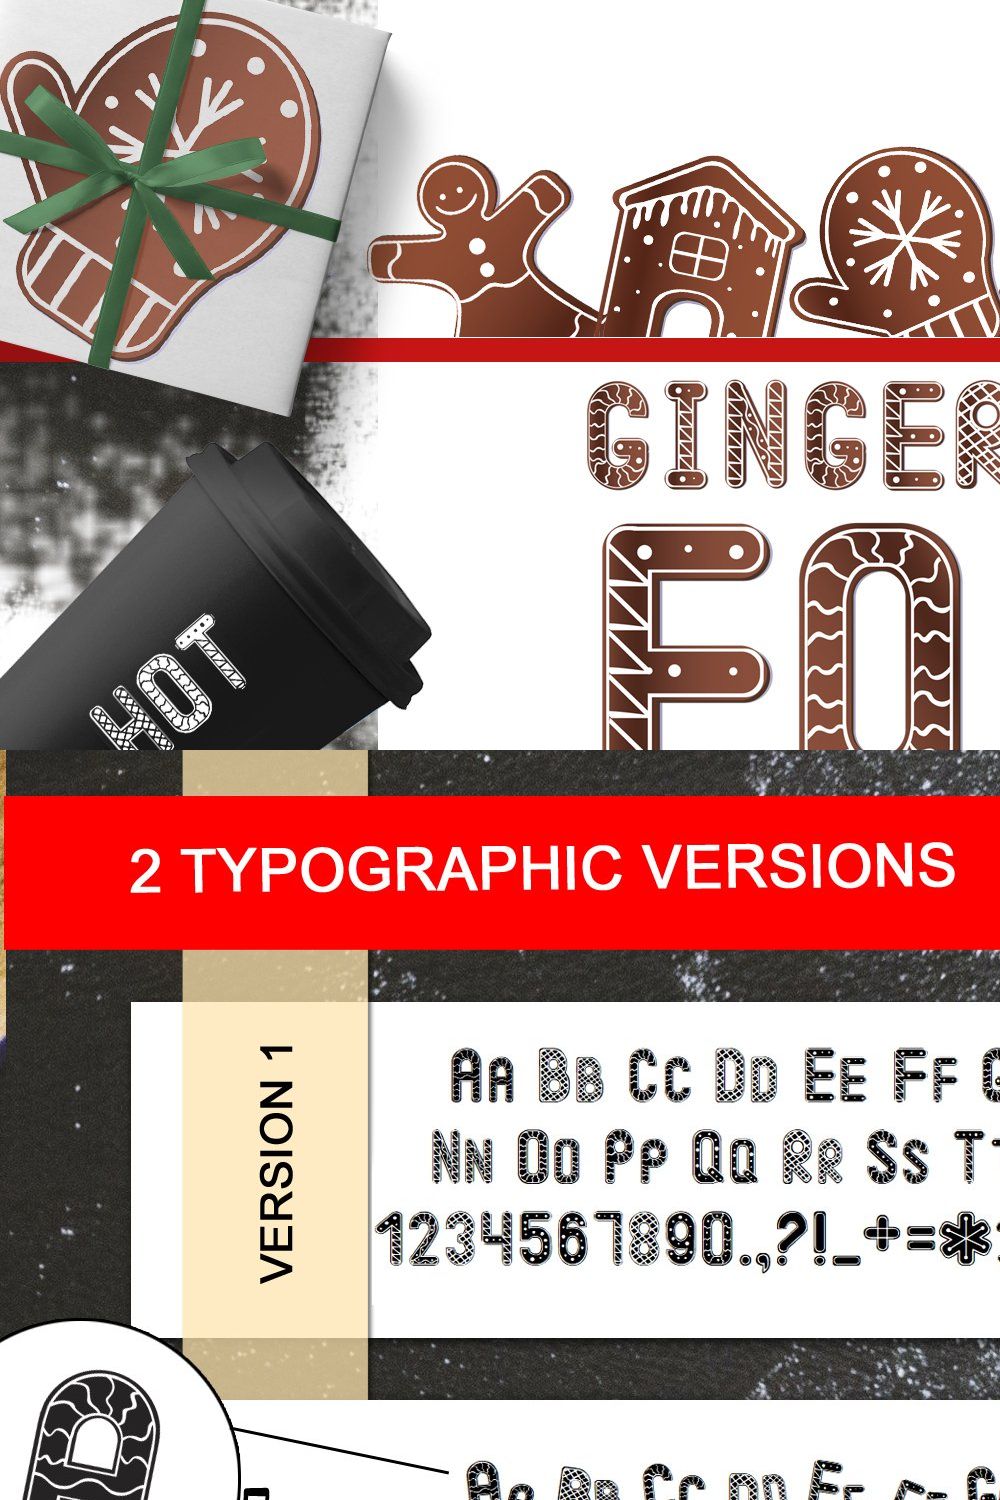 SALE! Gingerbread font - display pinterest preview image.